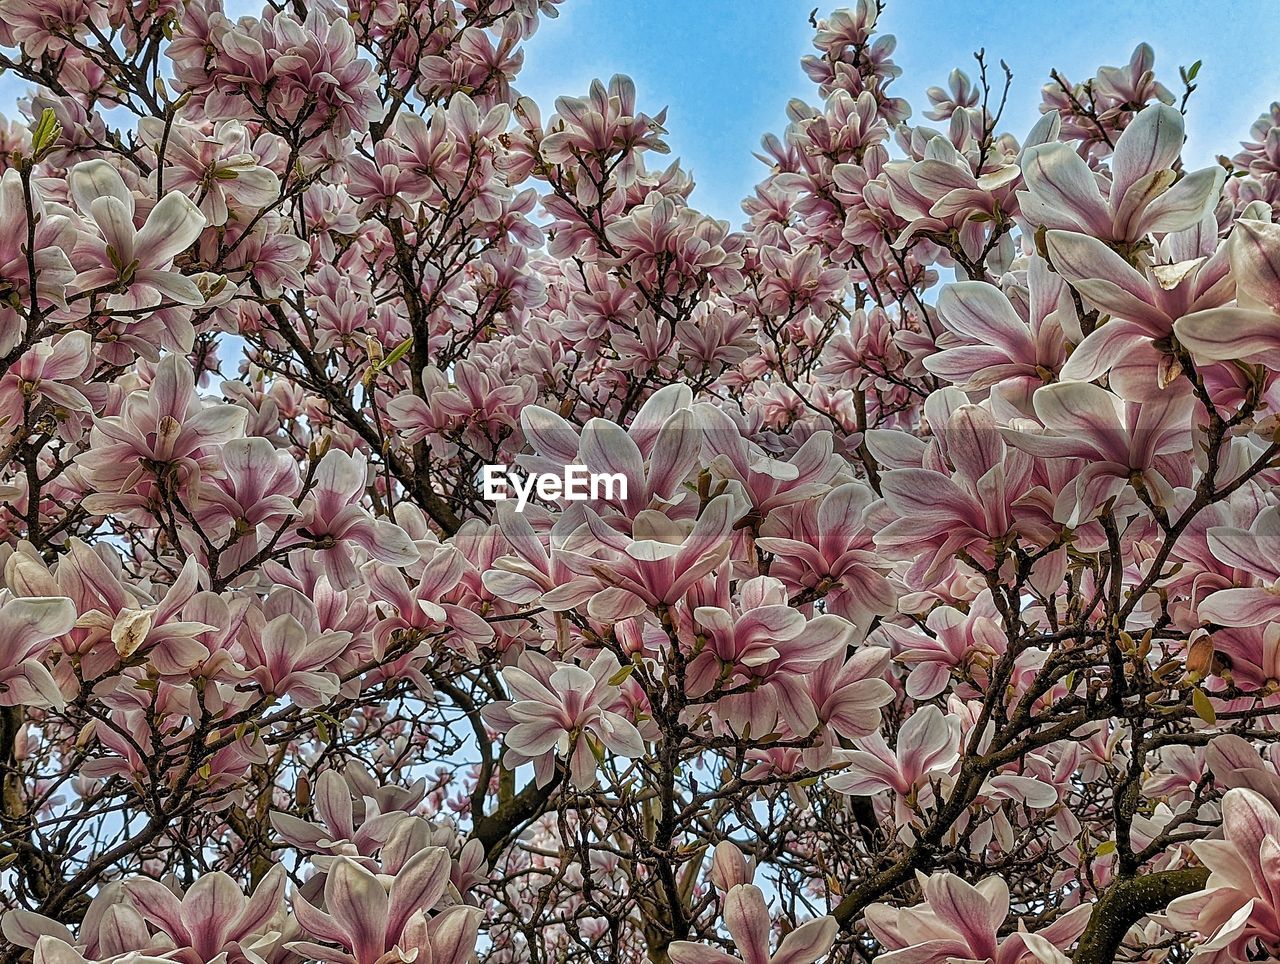 plant, flower, flowering plant, tree, beauty in nature, growth, pink, fragility, blossom, freshness, springtime, branch, low angle view, nature, sky, no people, magnolia, day, spring, cherry blossom, outdoors, petal, close-up, botany, cherry tree, abundance, produce